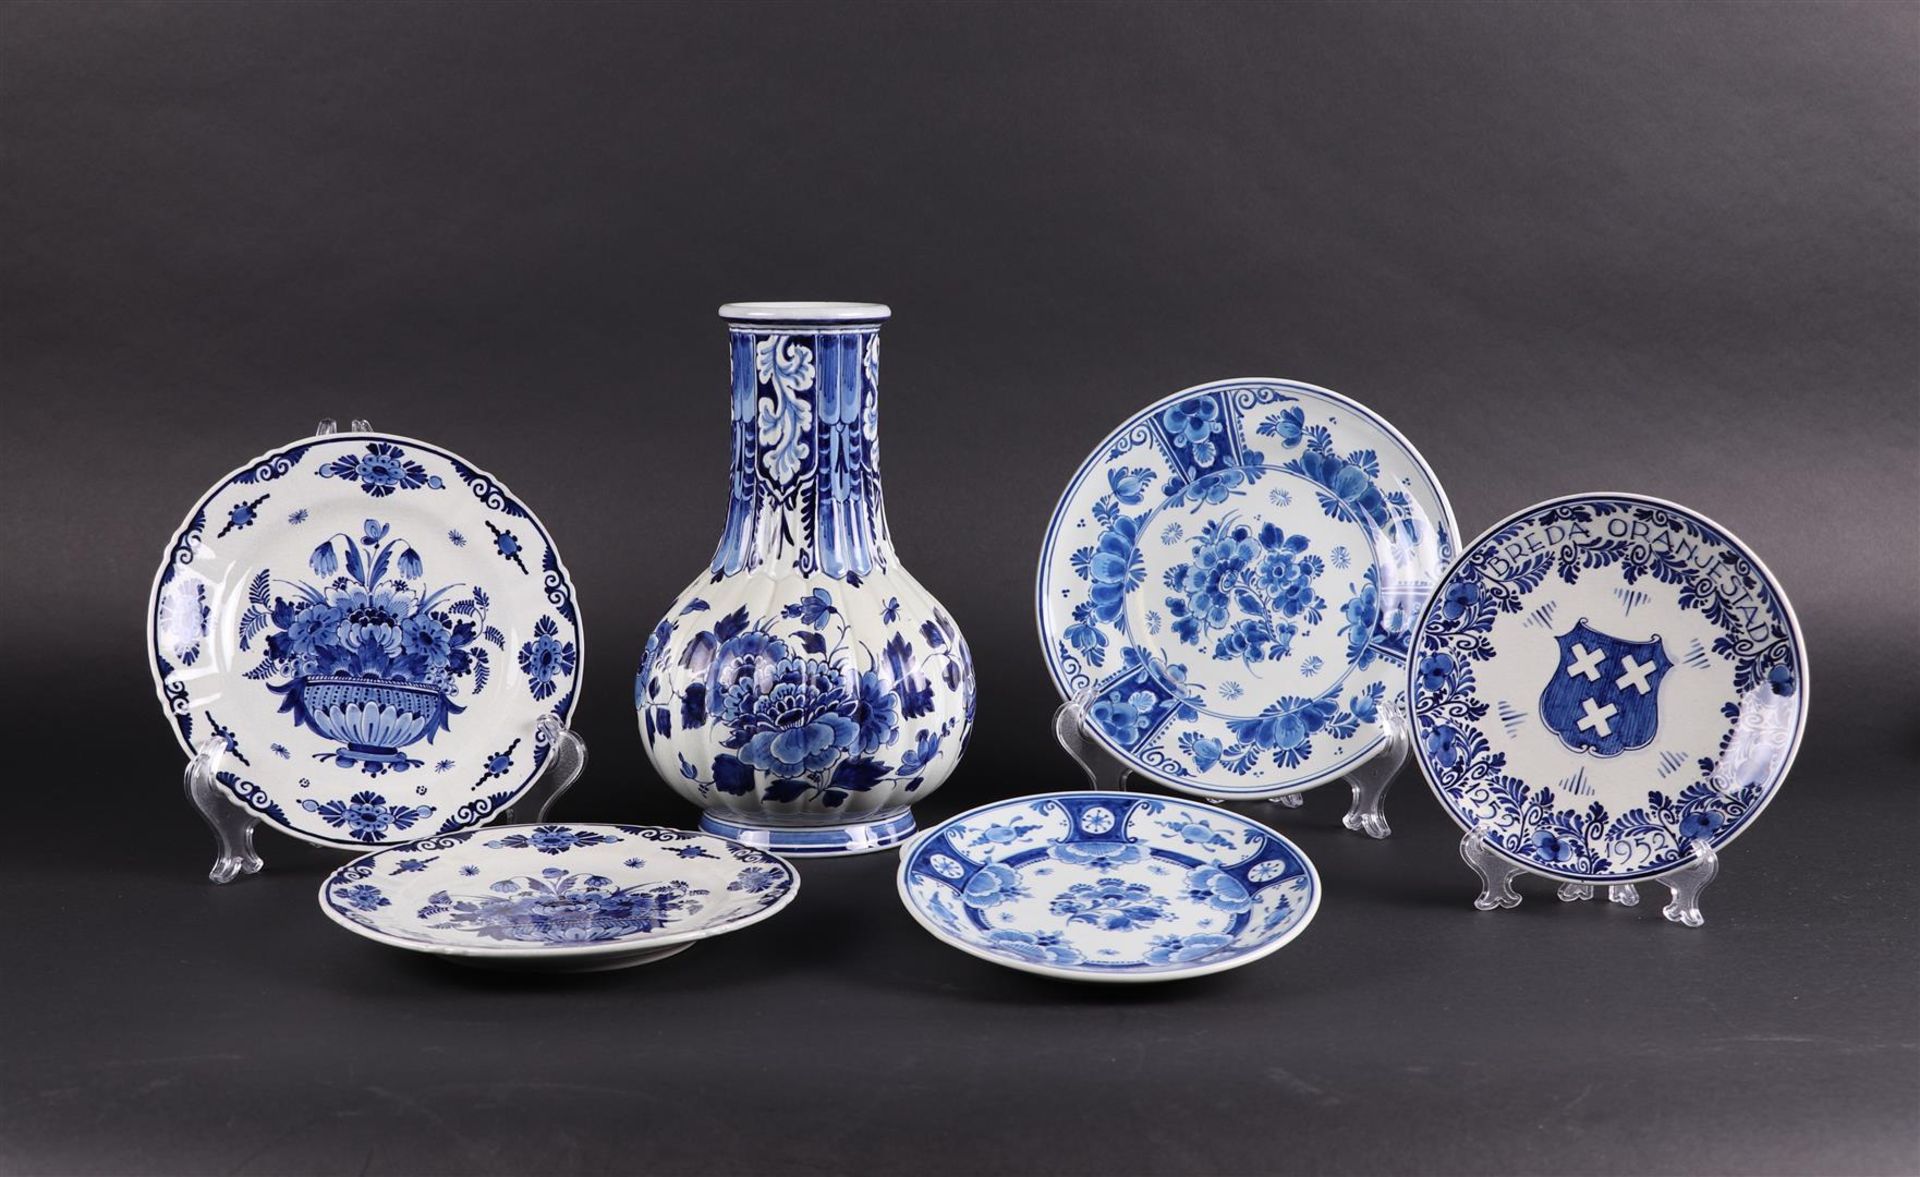 A lot consisting of Delft Blue plates and a ditto vase. All marked De Porceleyne Fles.